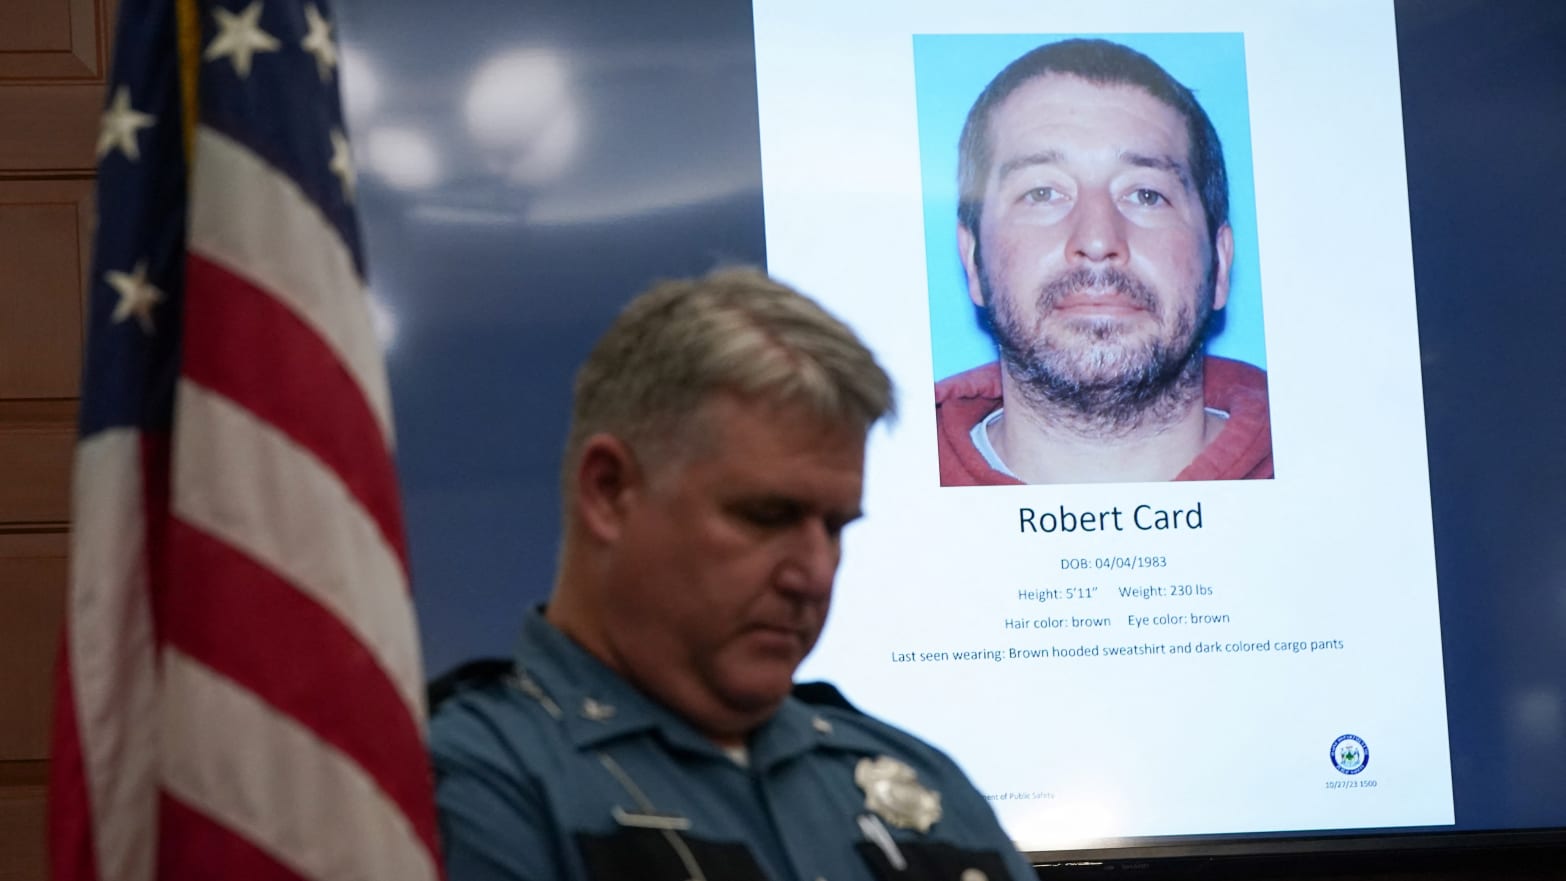 A police officer stands next to a screen displaying the picture of the suspected shooter, during a press conference following the deadly mass shooting, at City Hall in Lewiston, Maine.